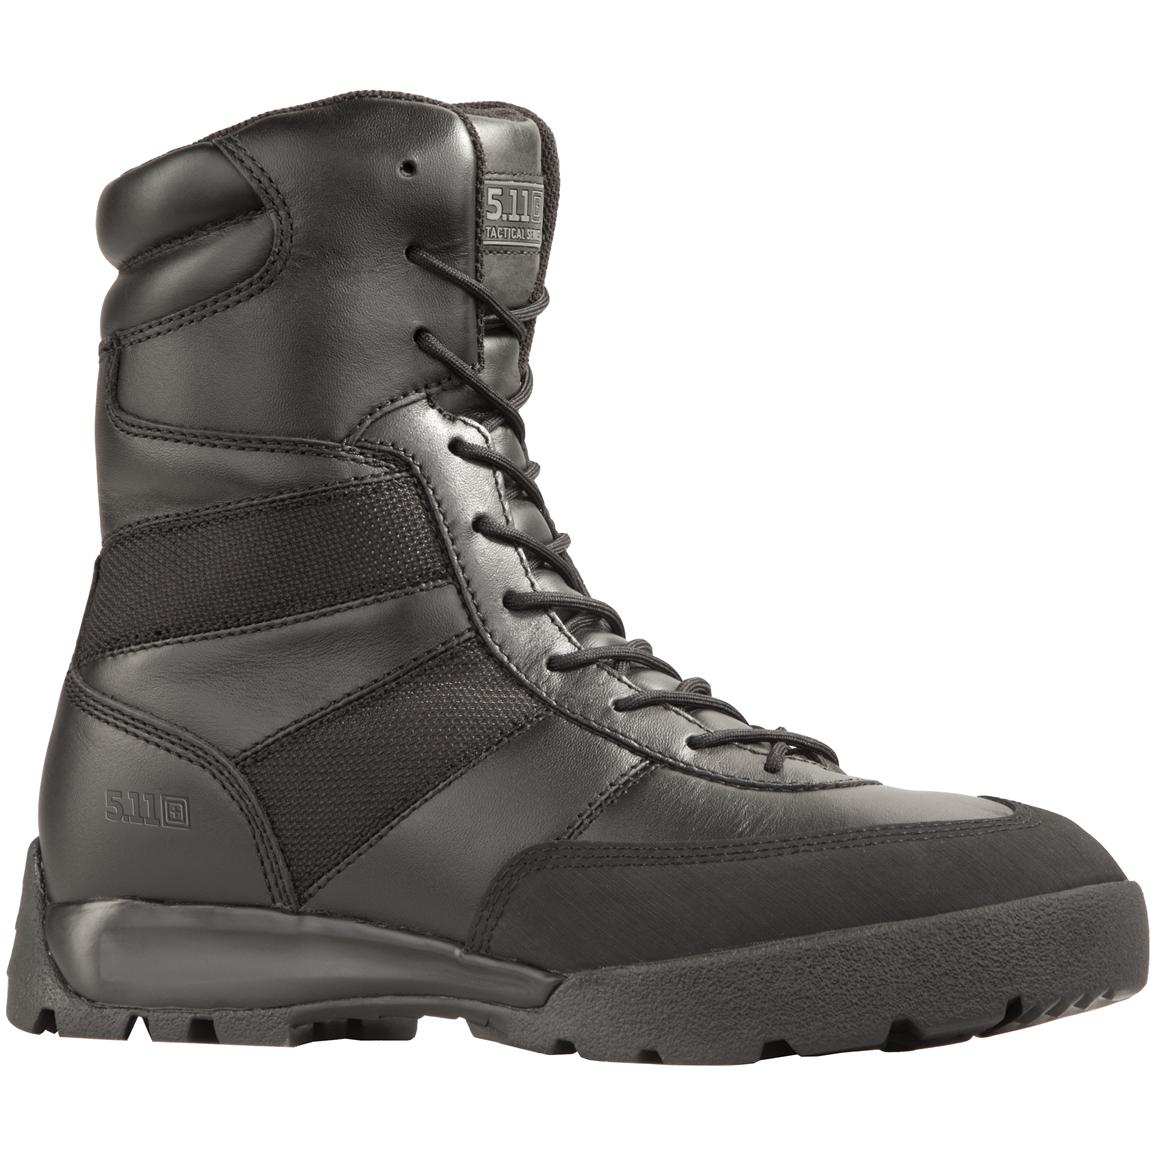 Sale 5 11 Hrt Boots In Stock